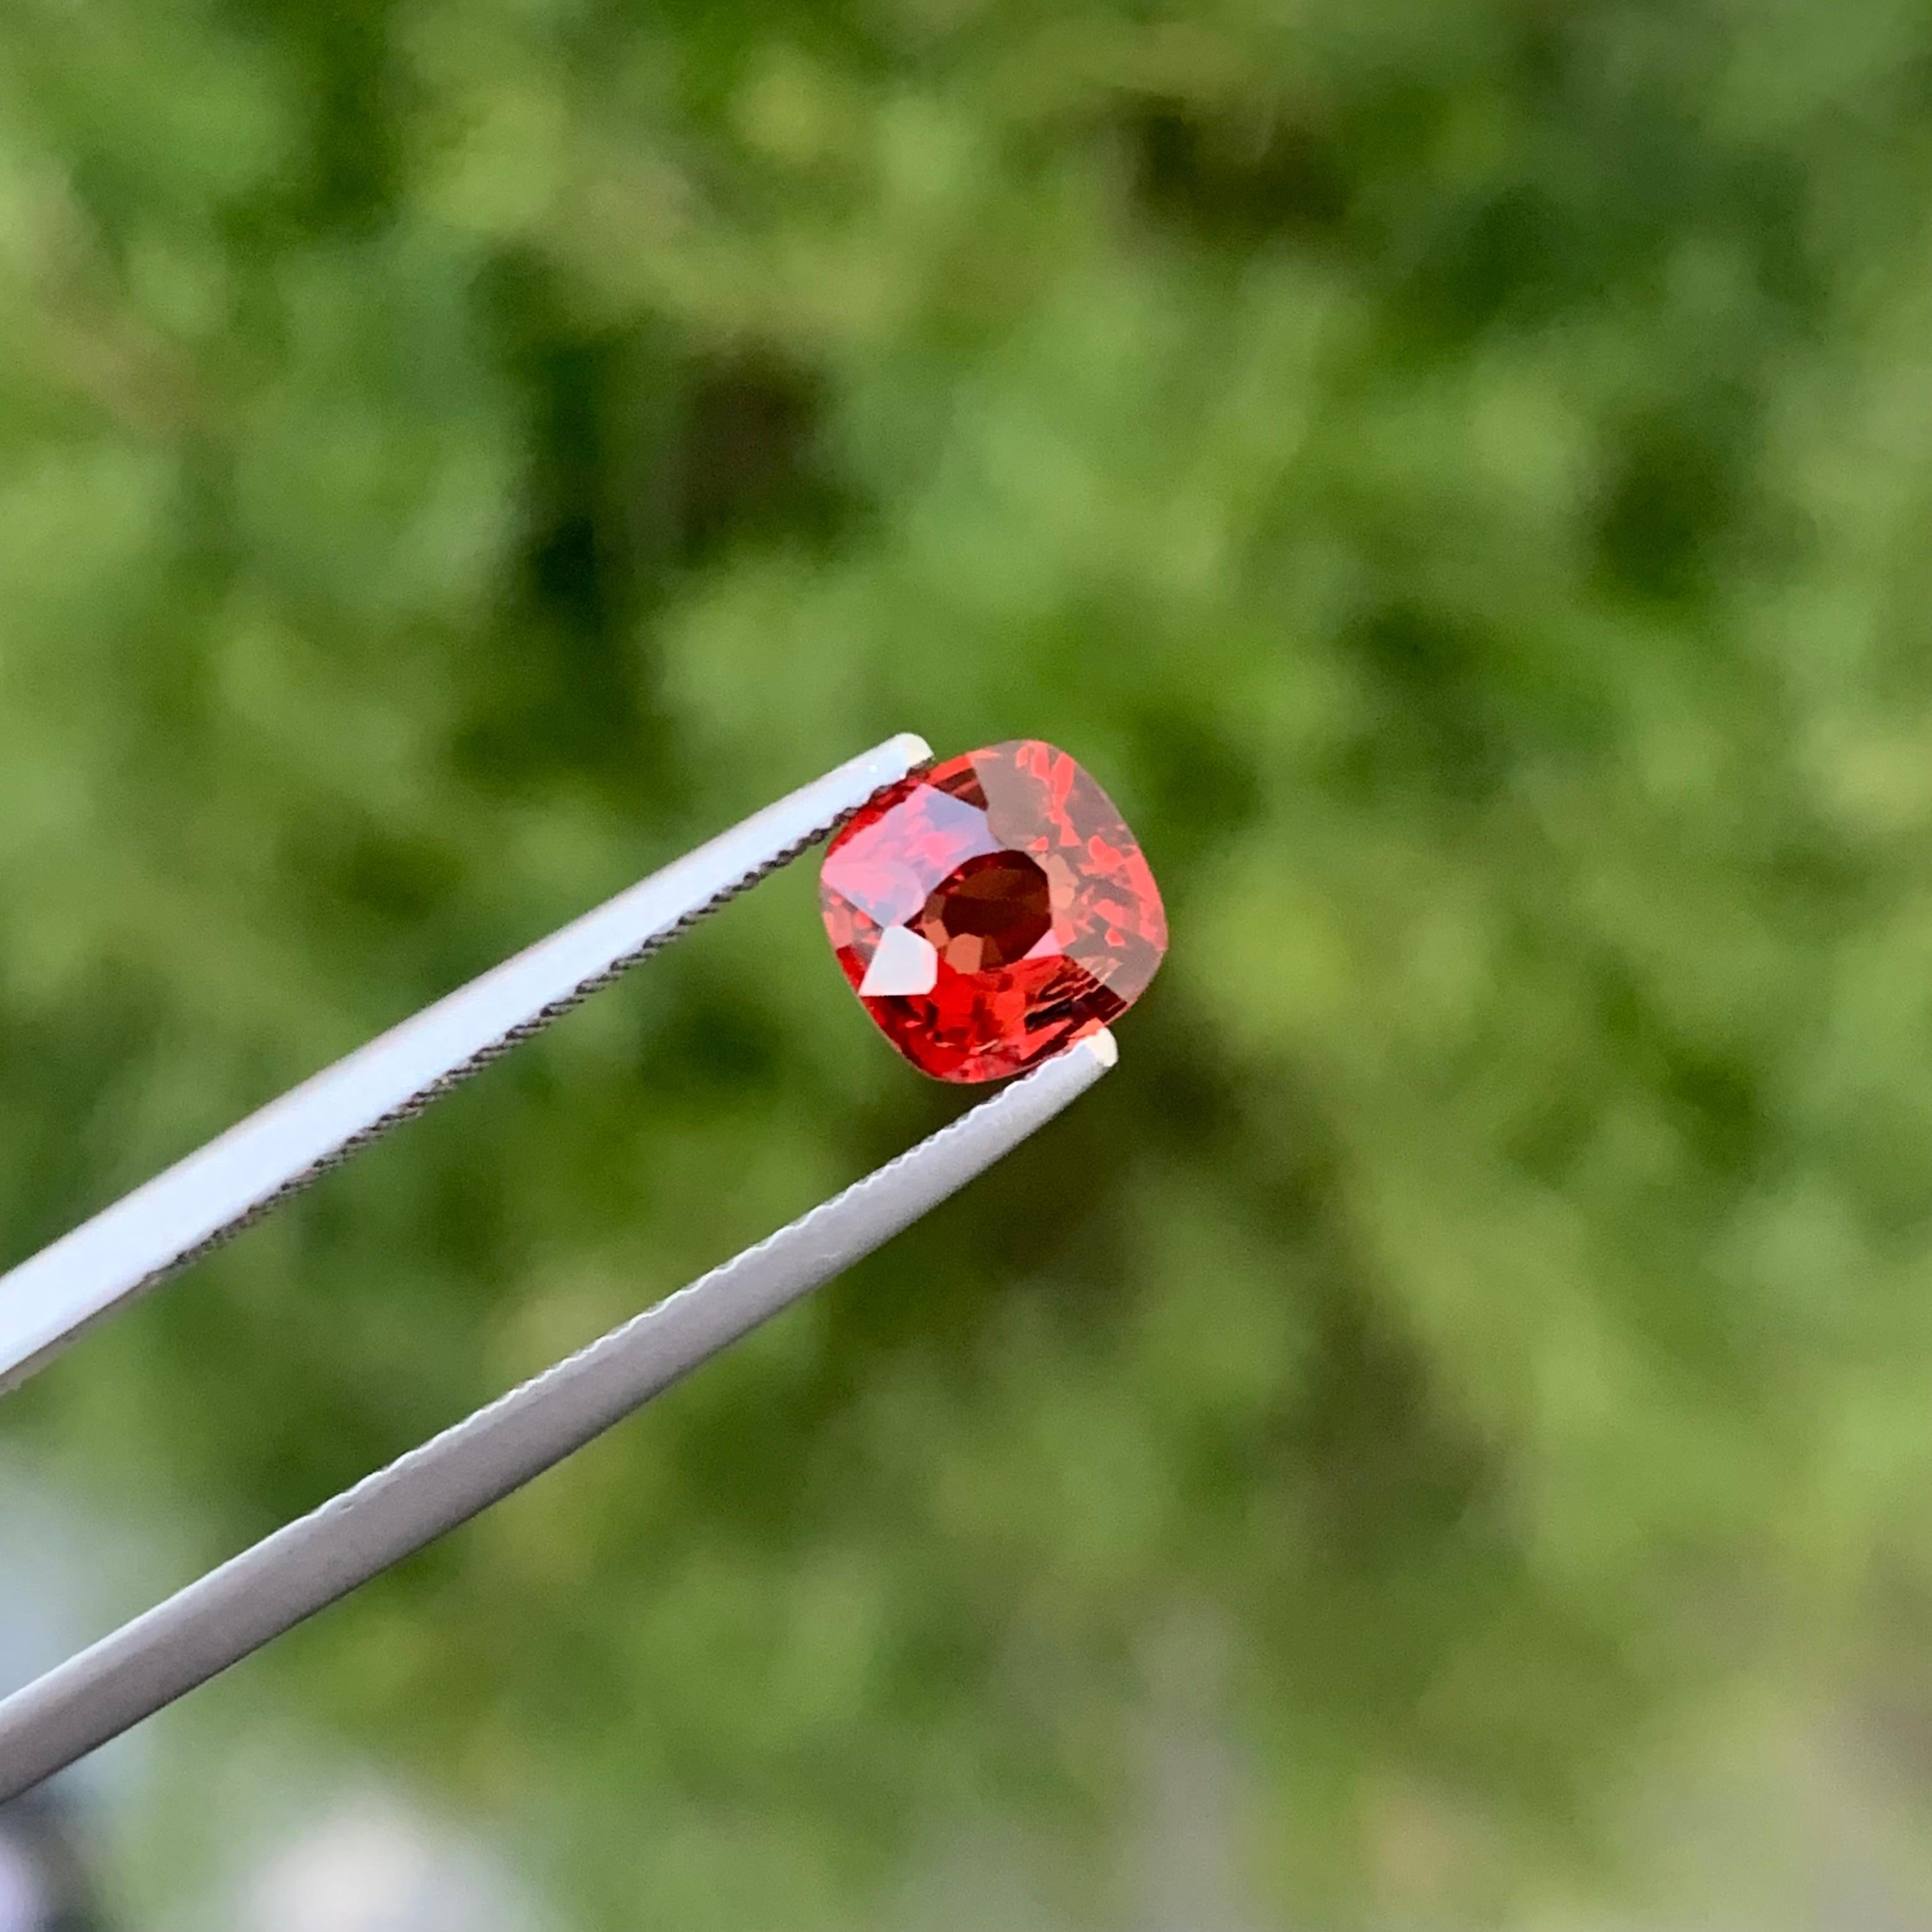 Faceted Red Spinel
Weight: 1.25 Carats
Dimension: 6.5x6.4x3.9 Mm
Origin: Burma 
Shape: Cushion
Color: Red
Treatment: Non / Natural
Certificate: On Demand
.
The red spinel gemstone is linked to the root chakra and is beneficial in boosting stamina